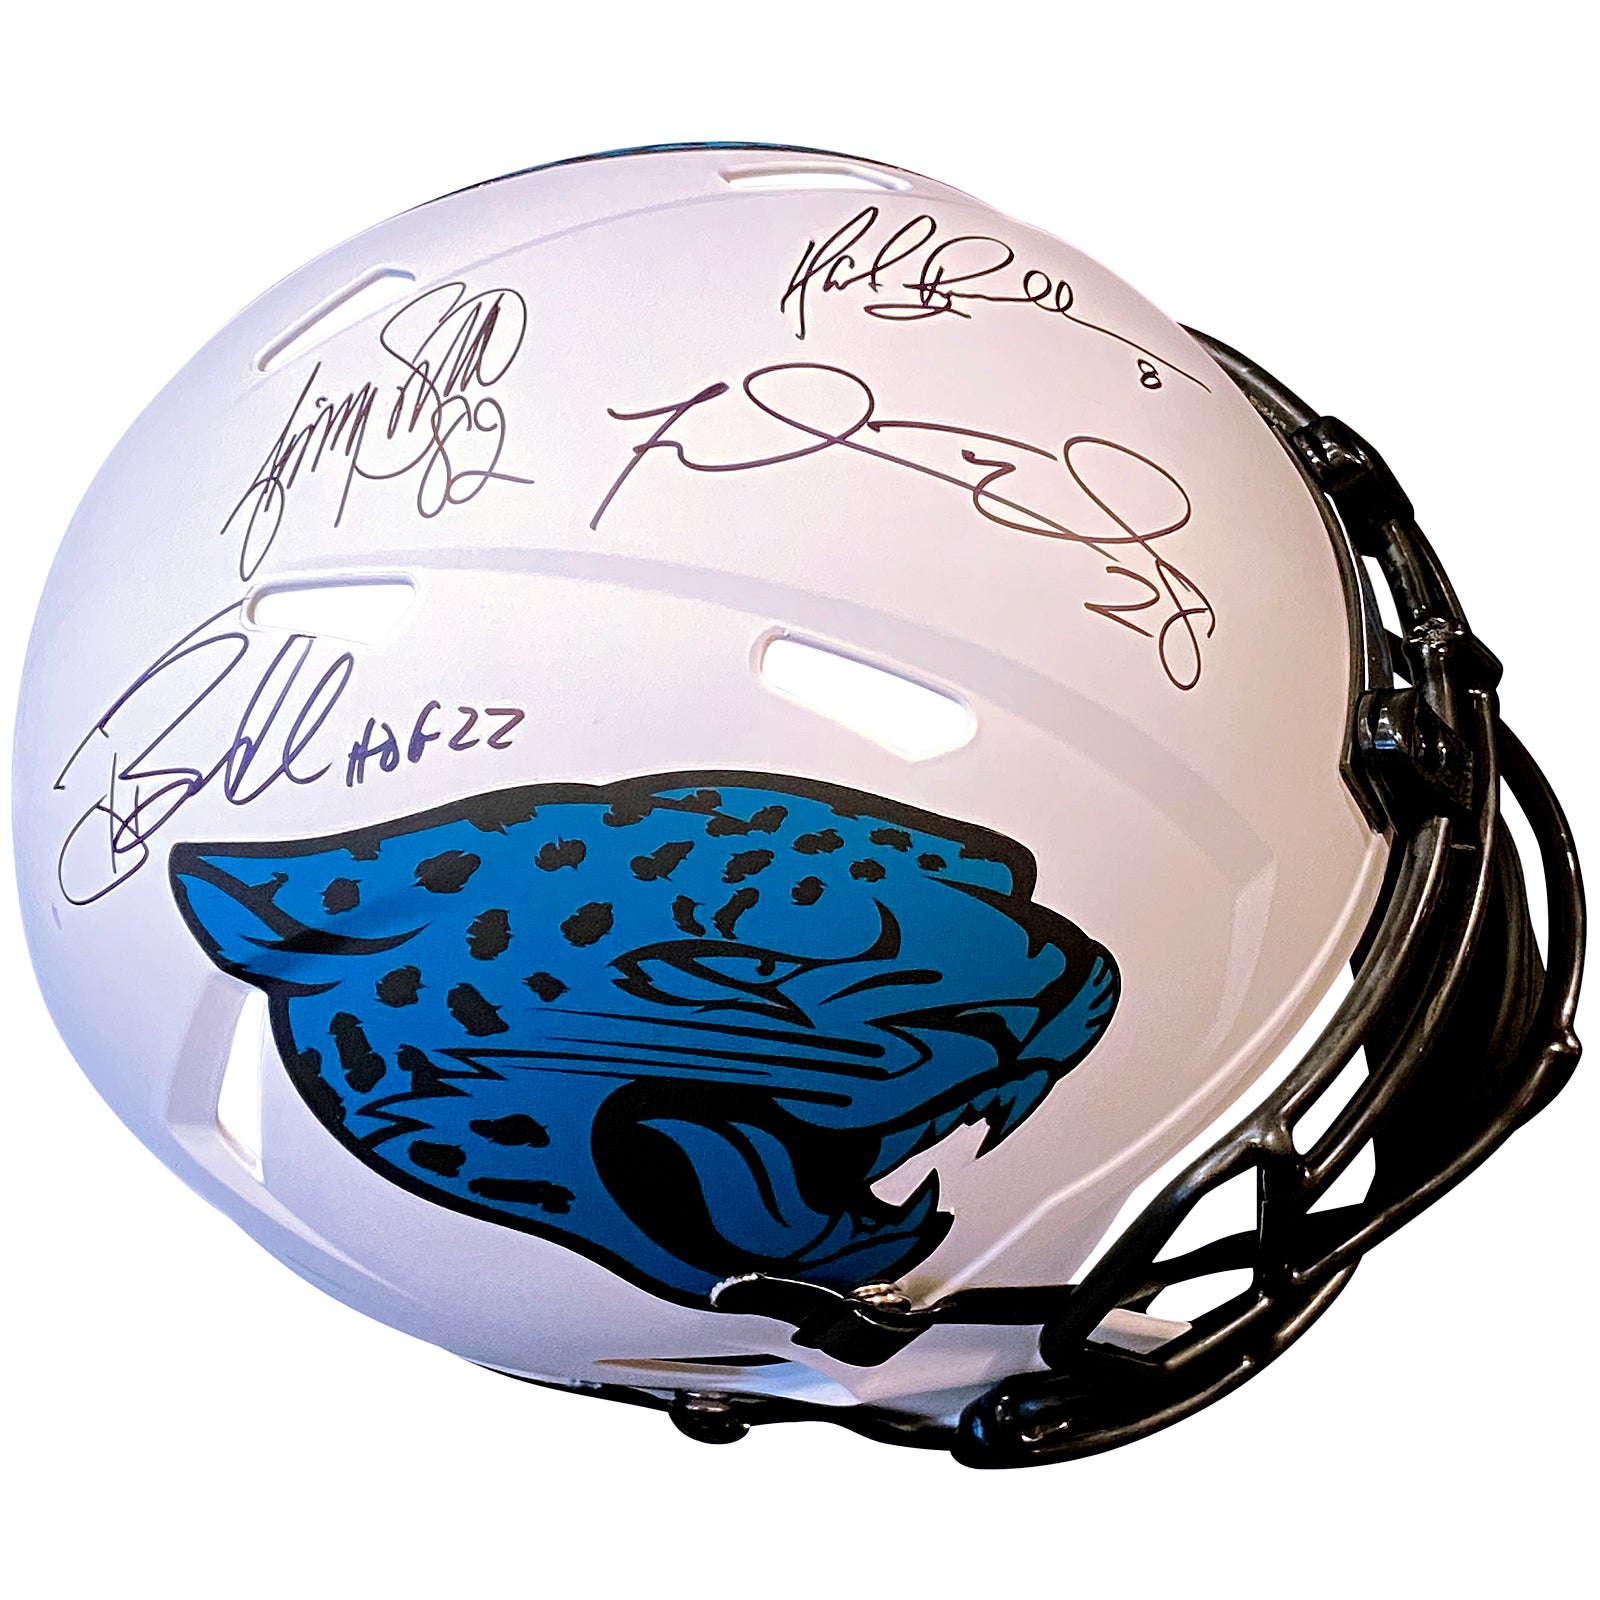 Tony Boselli, Mark Brunell, Jimmy Smith And Fred Taylor Autographed Jacksonville Jaguars (LUNAR) Deluxe Full-Size Replica Helmet - Pride of the Jaguars